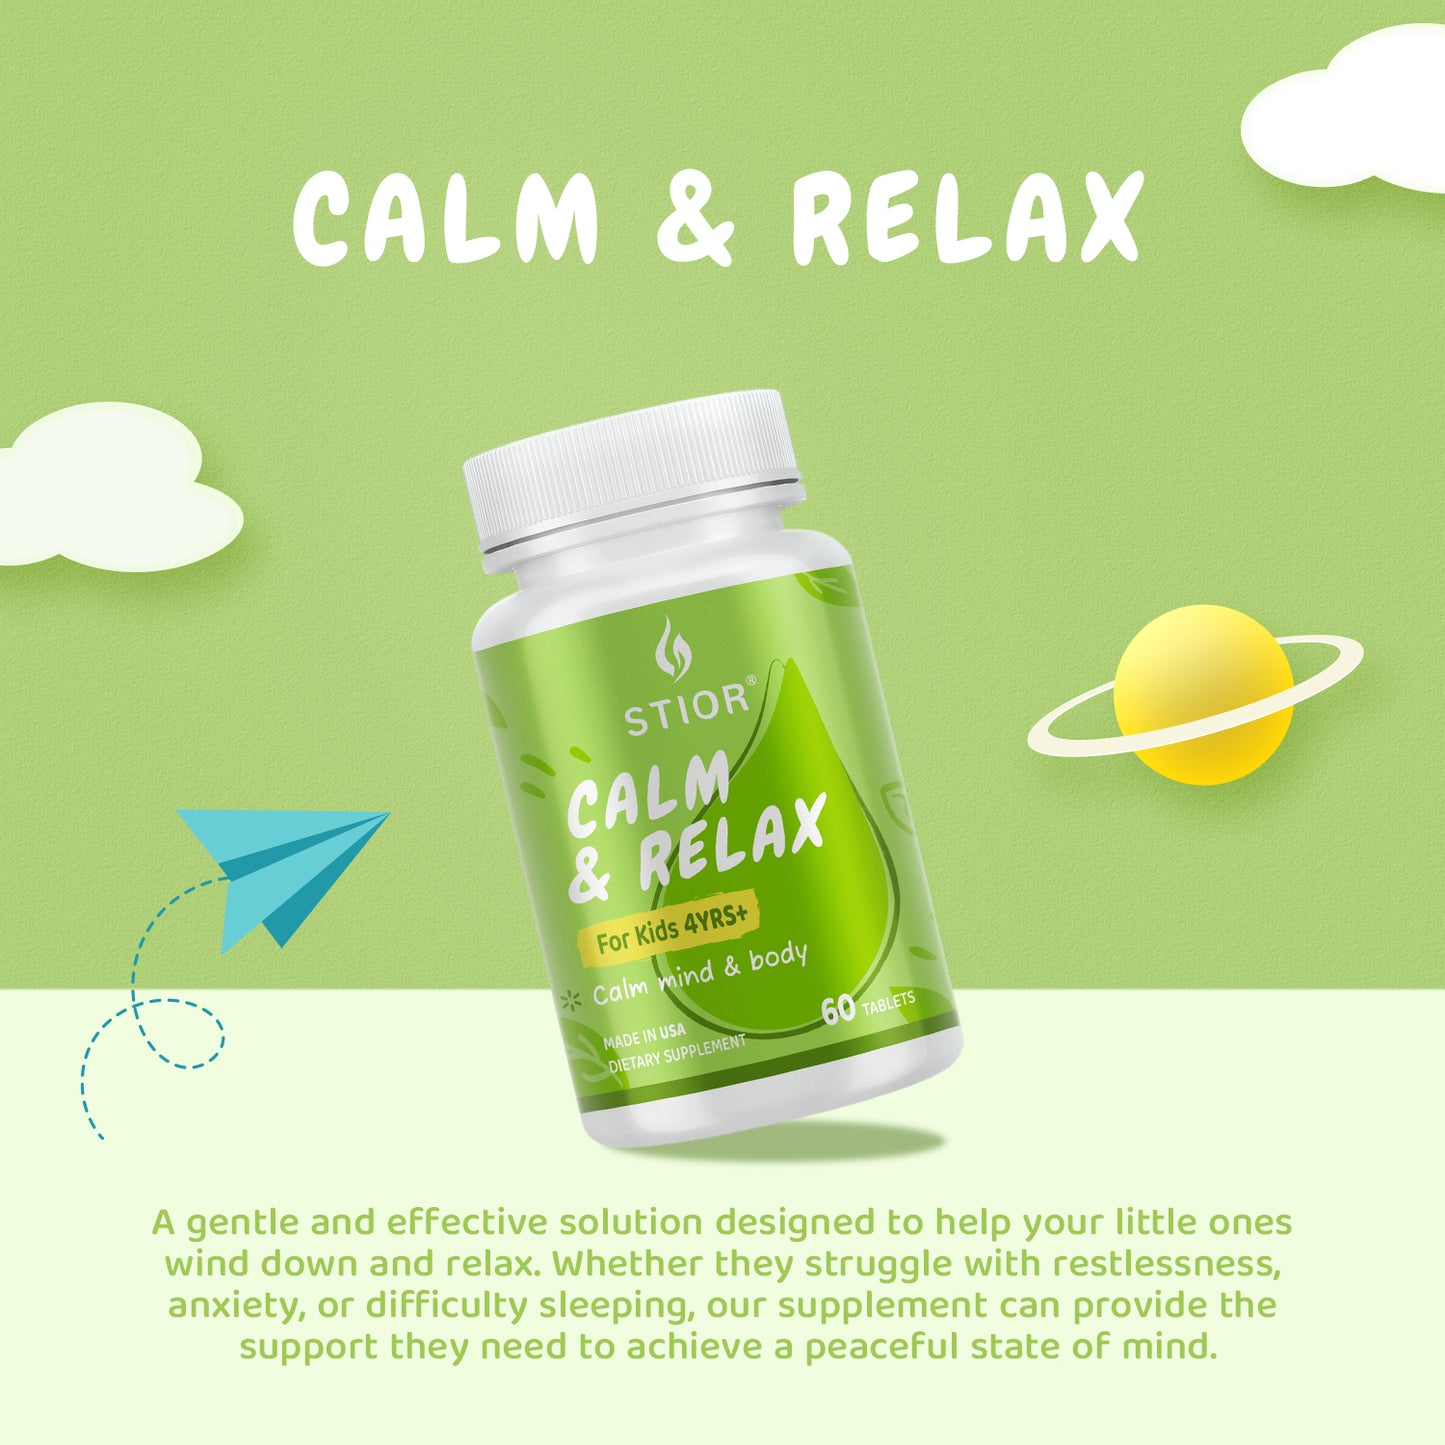 Stior Calm & Relax - CALM MIND & BODY (For kids)